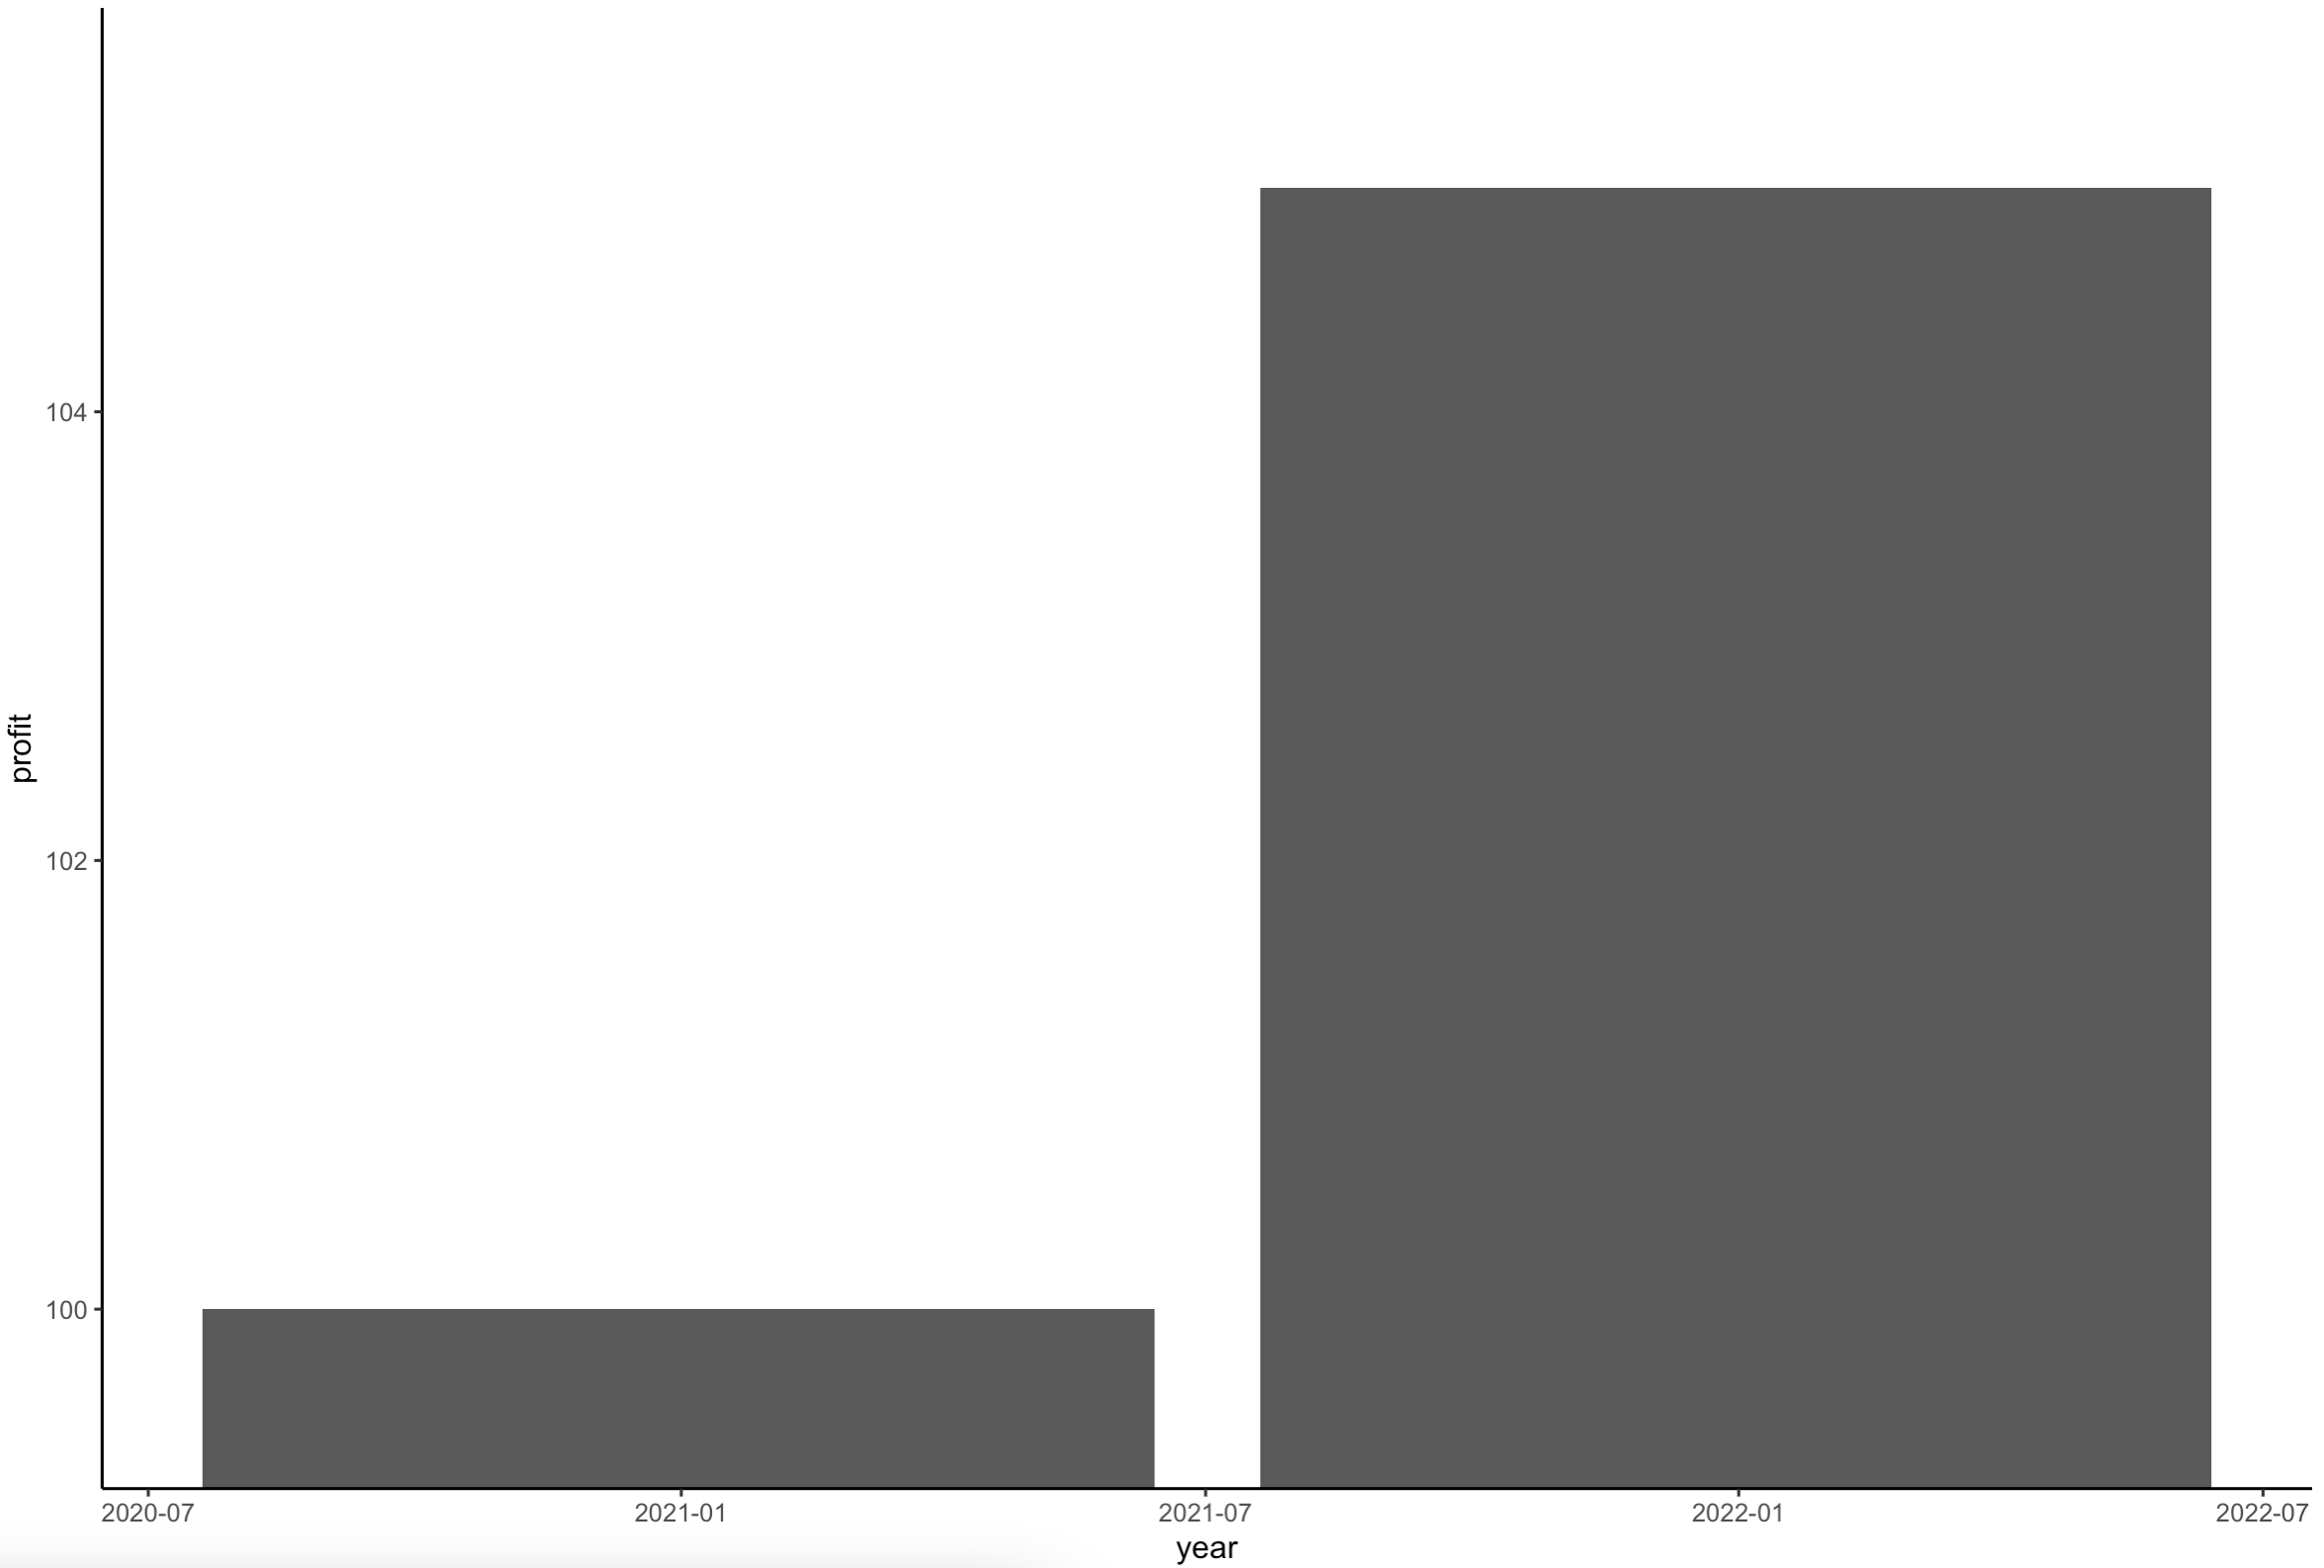 Image 1 - Bar chart with manipulatively formatted Y-axis